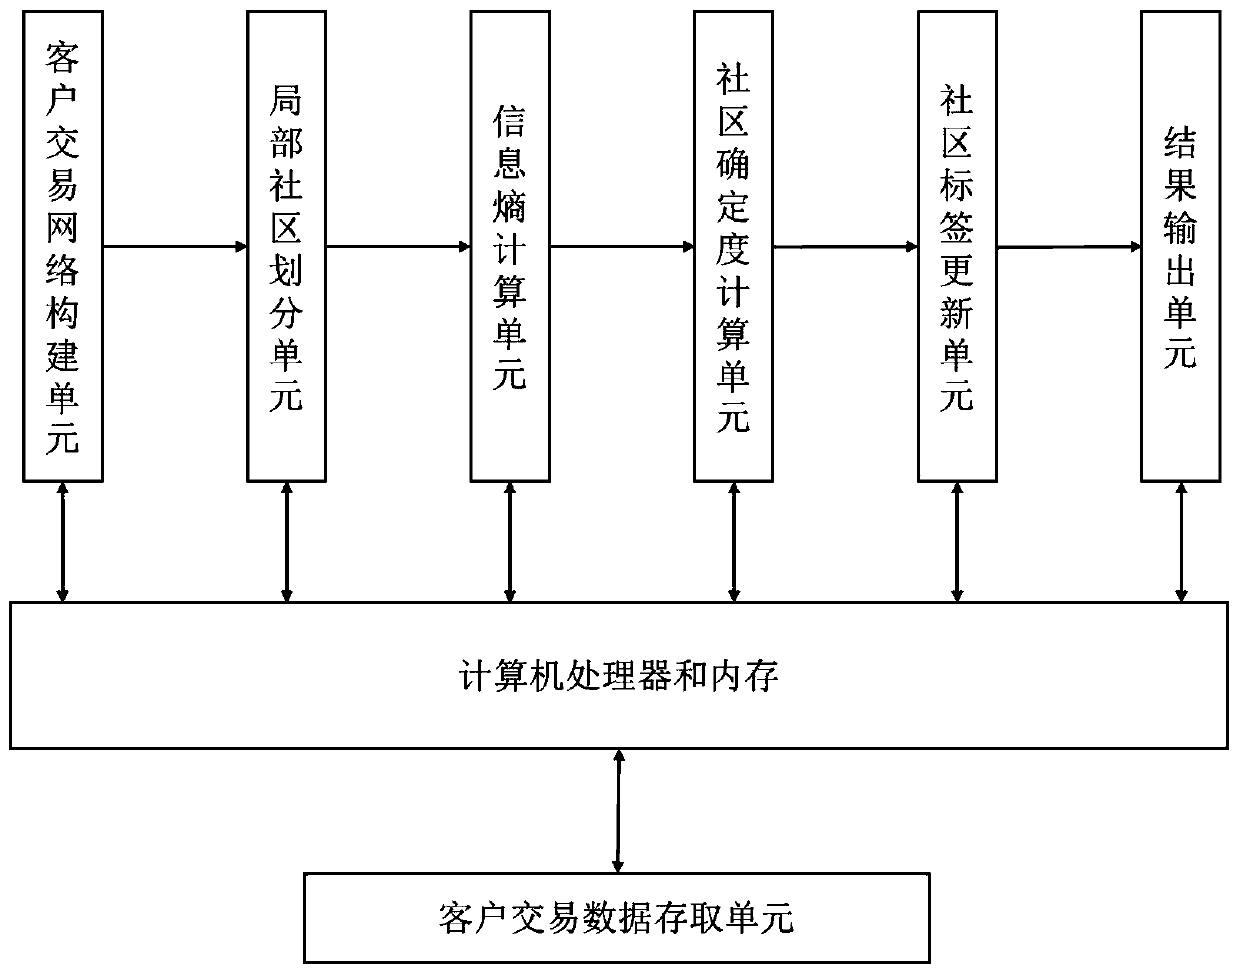 Community structure discovery method and system of bank customer transaction network